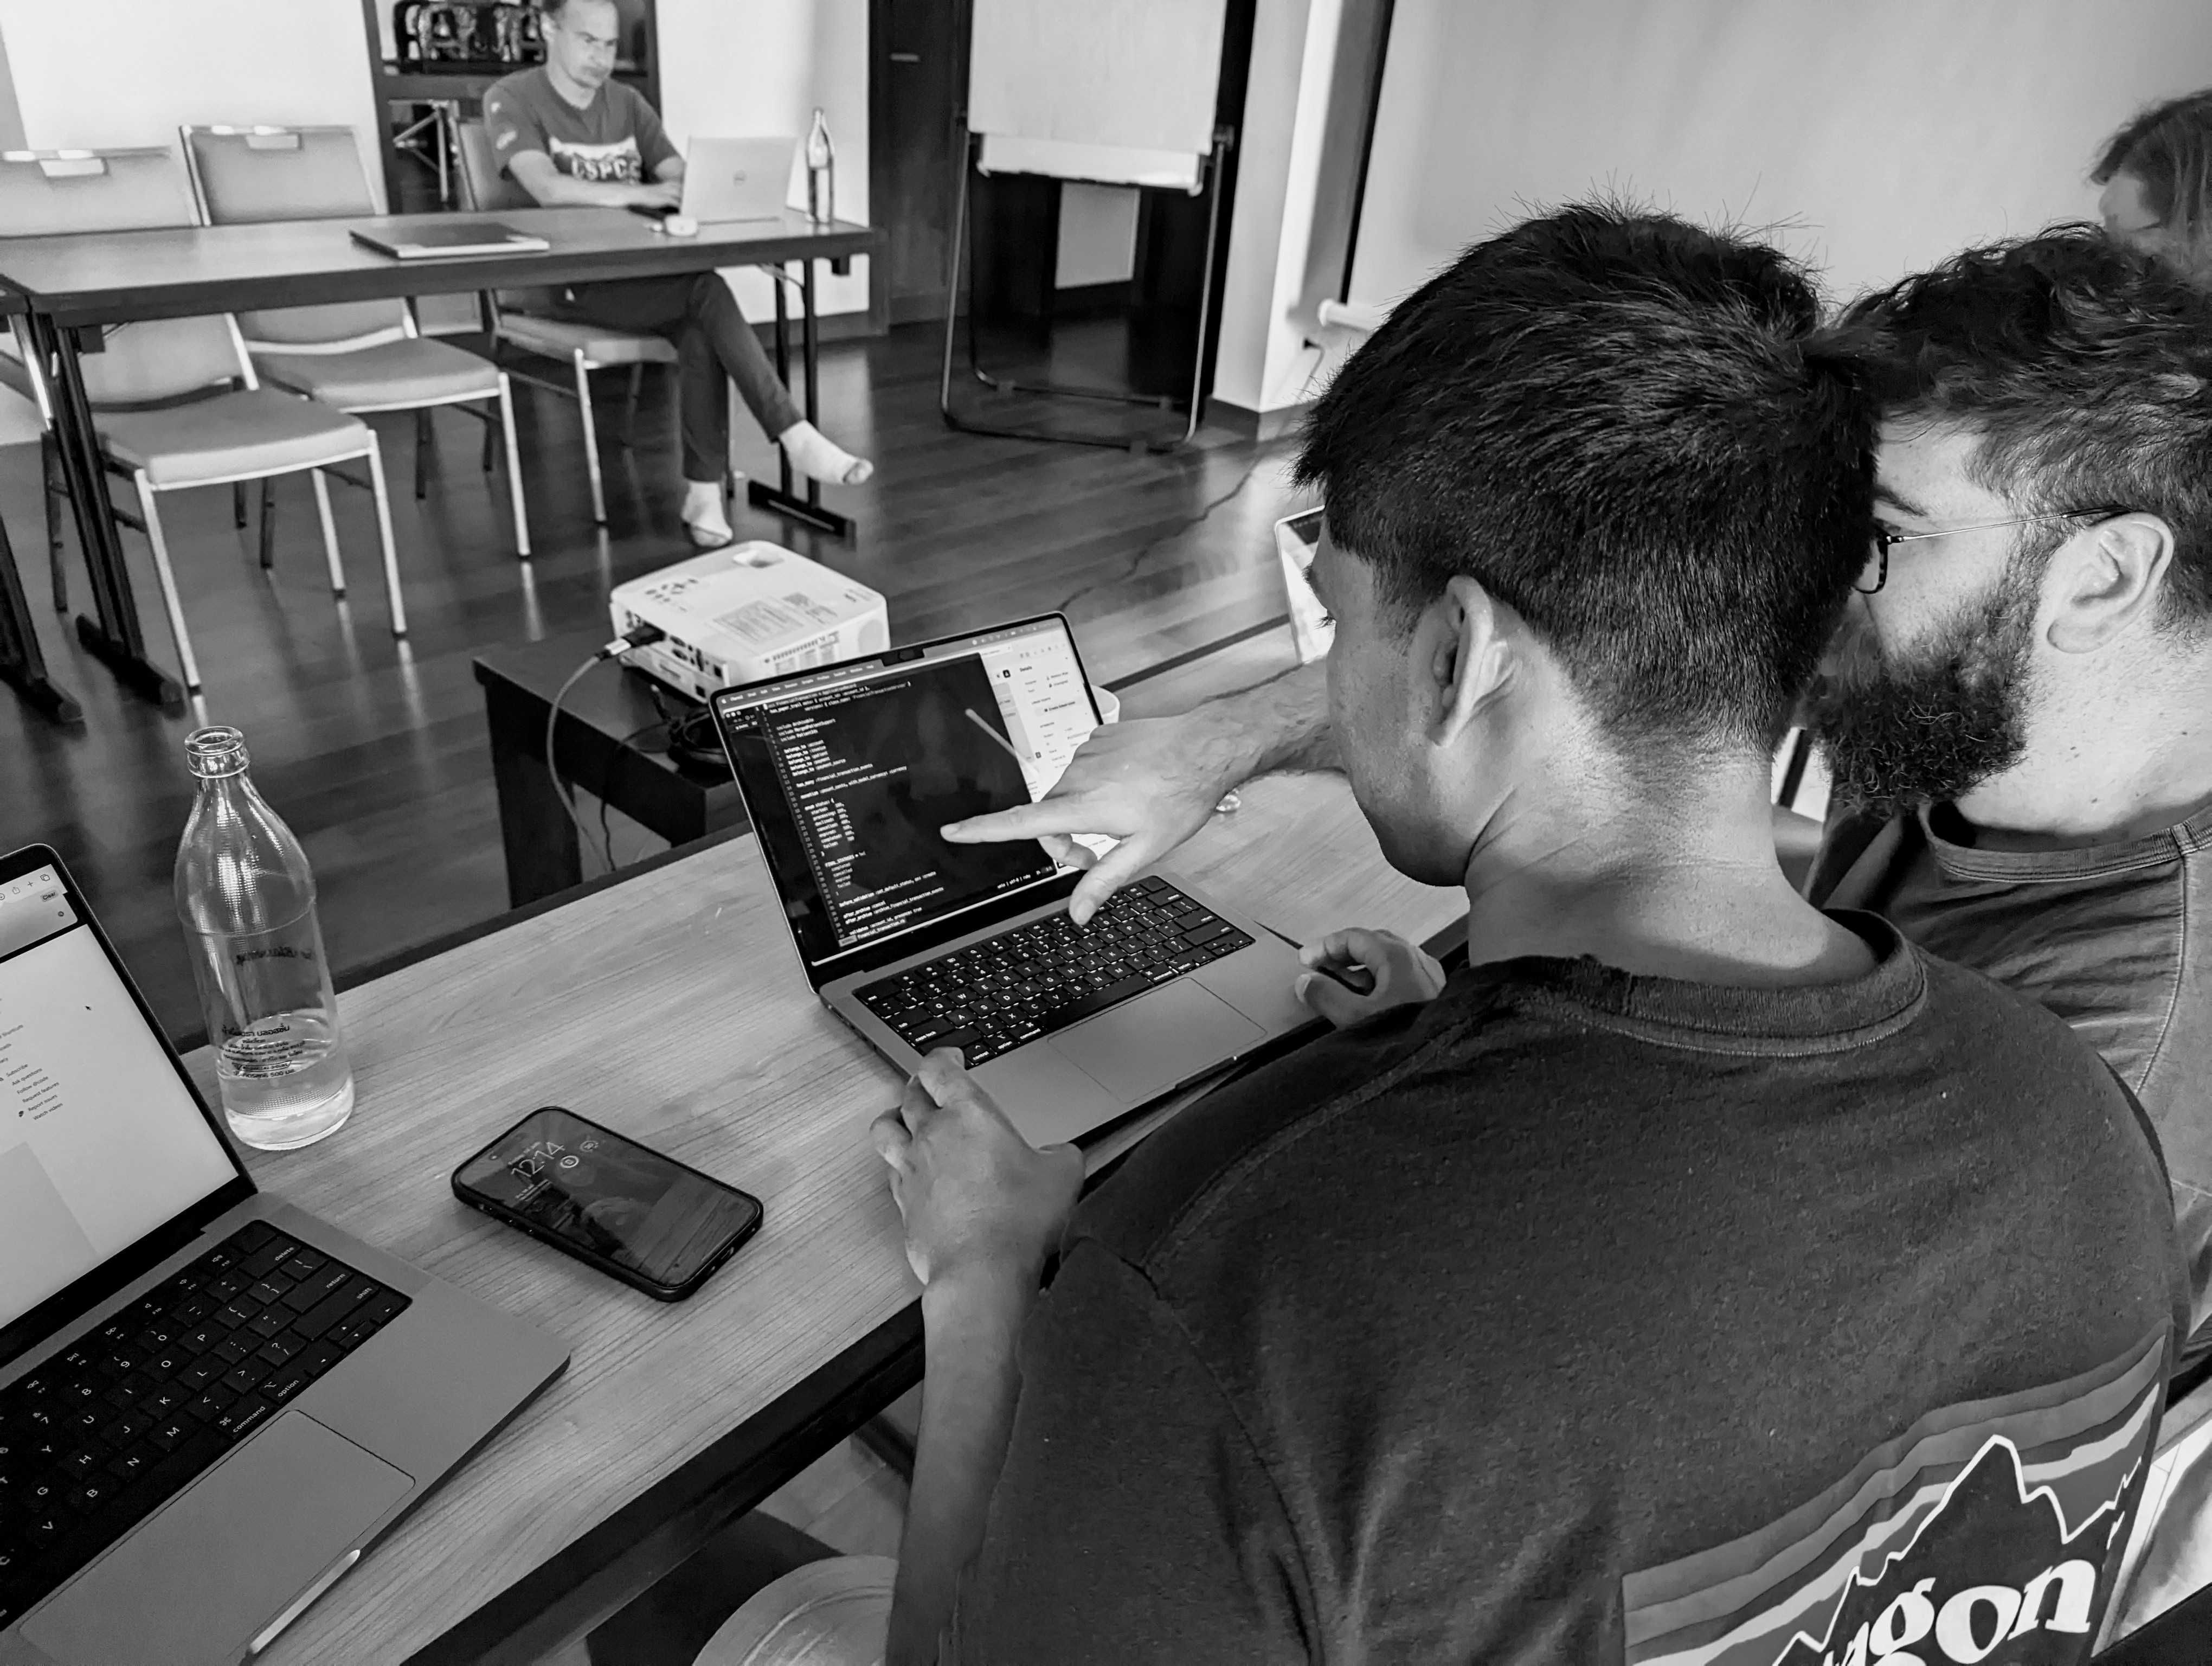 Joel and Fahad looking at a laptop screen together in the Phuket team workroom